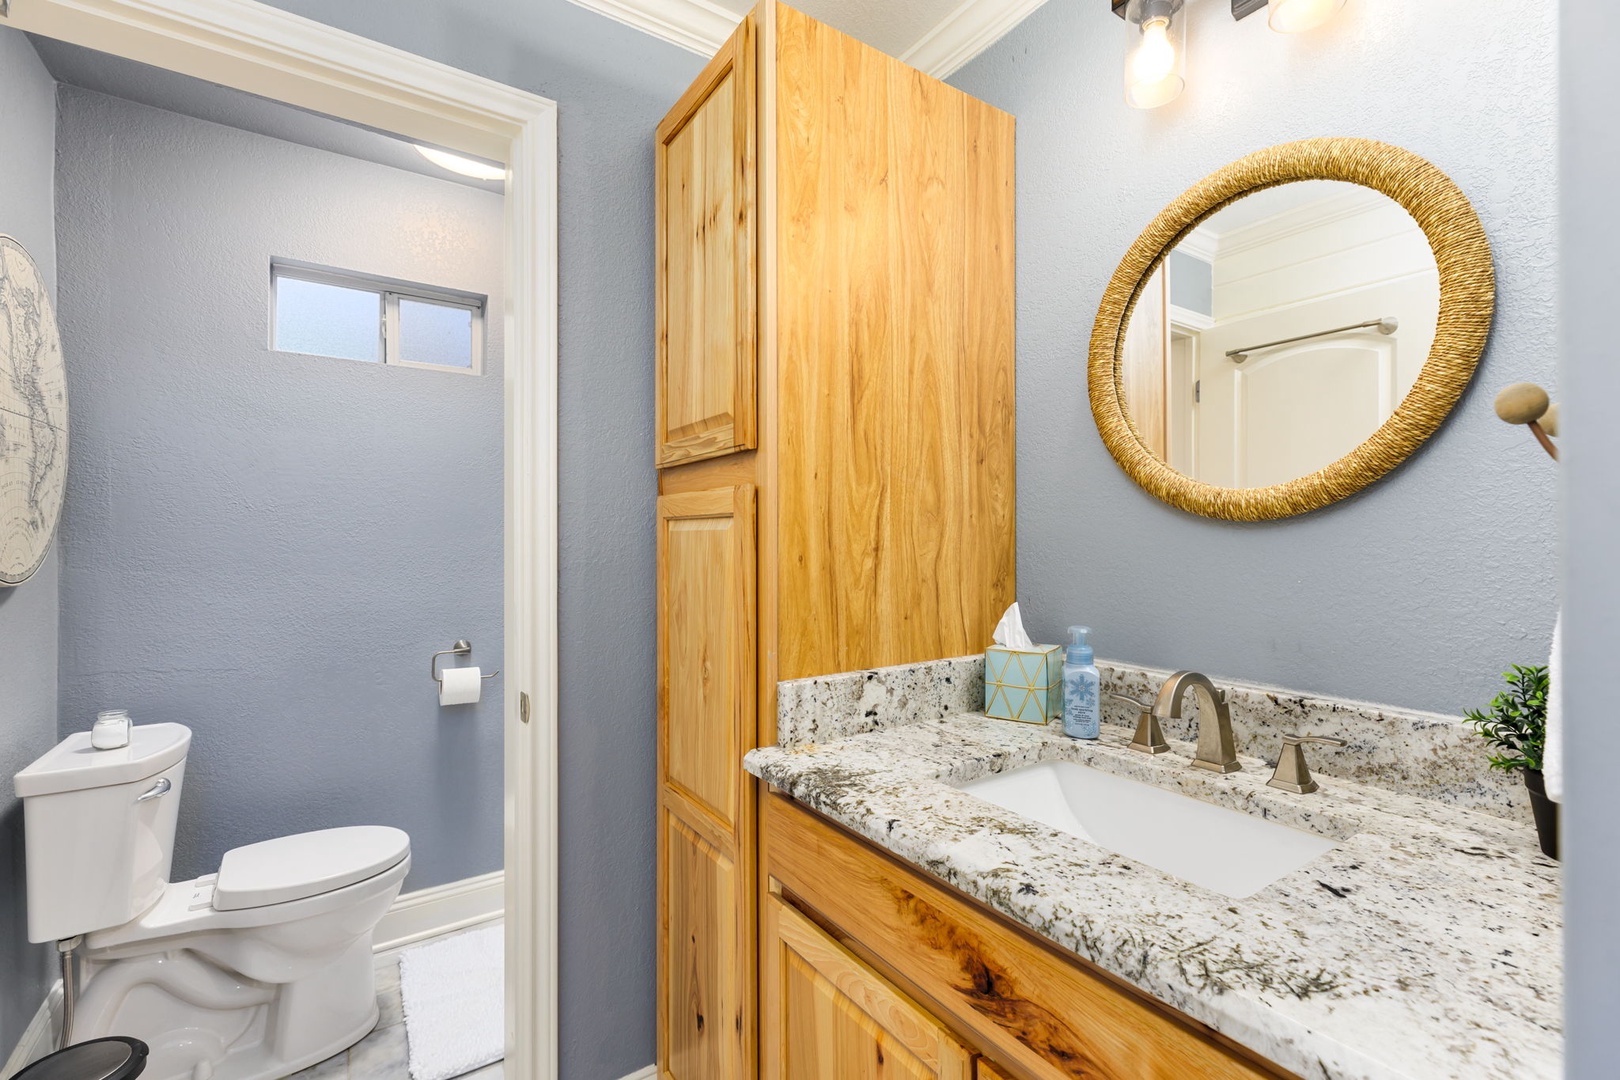 The full bath available in the cabin features a vanity with storage & shower